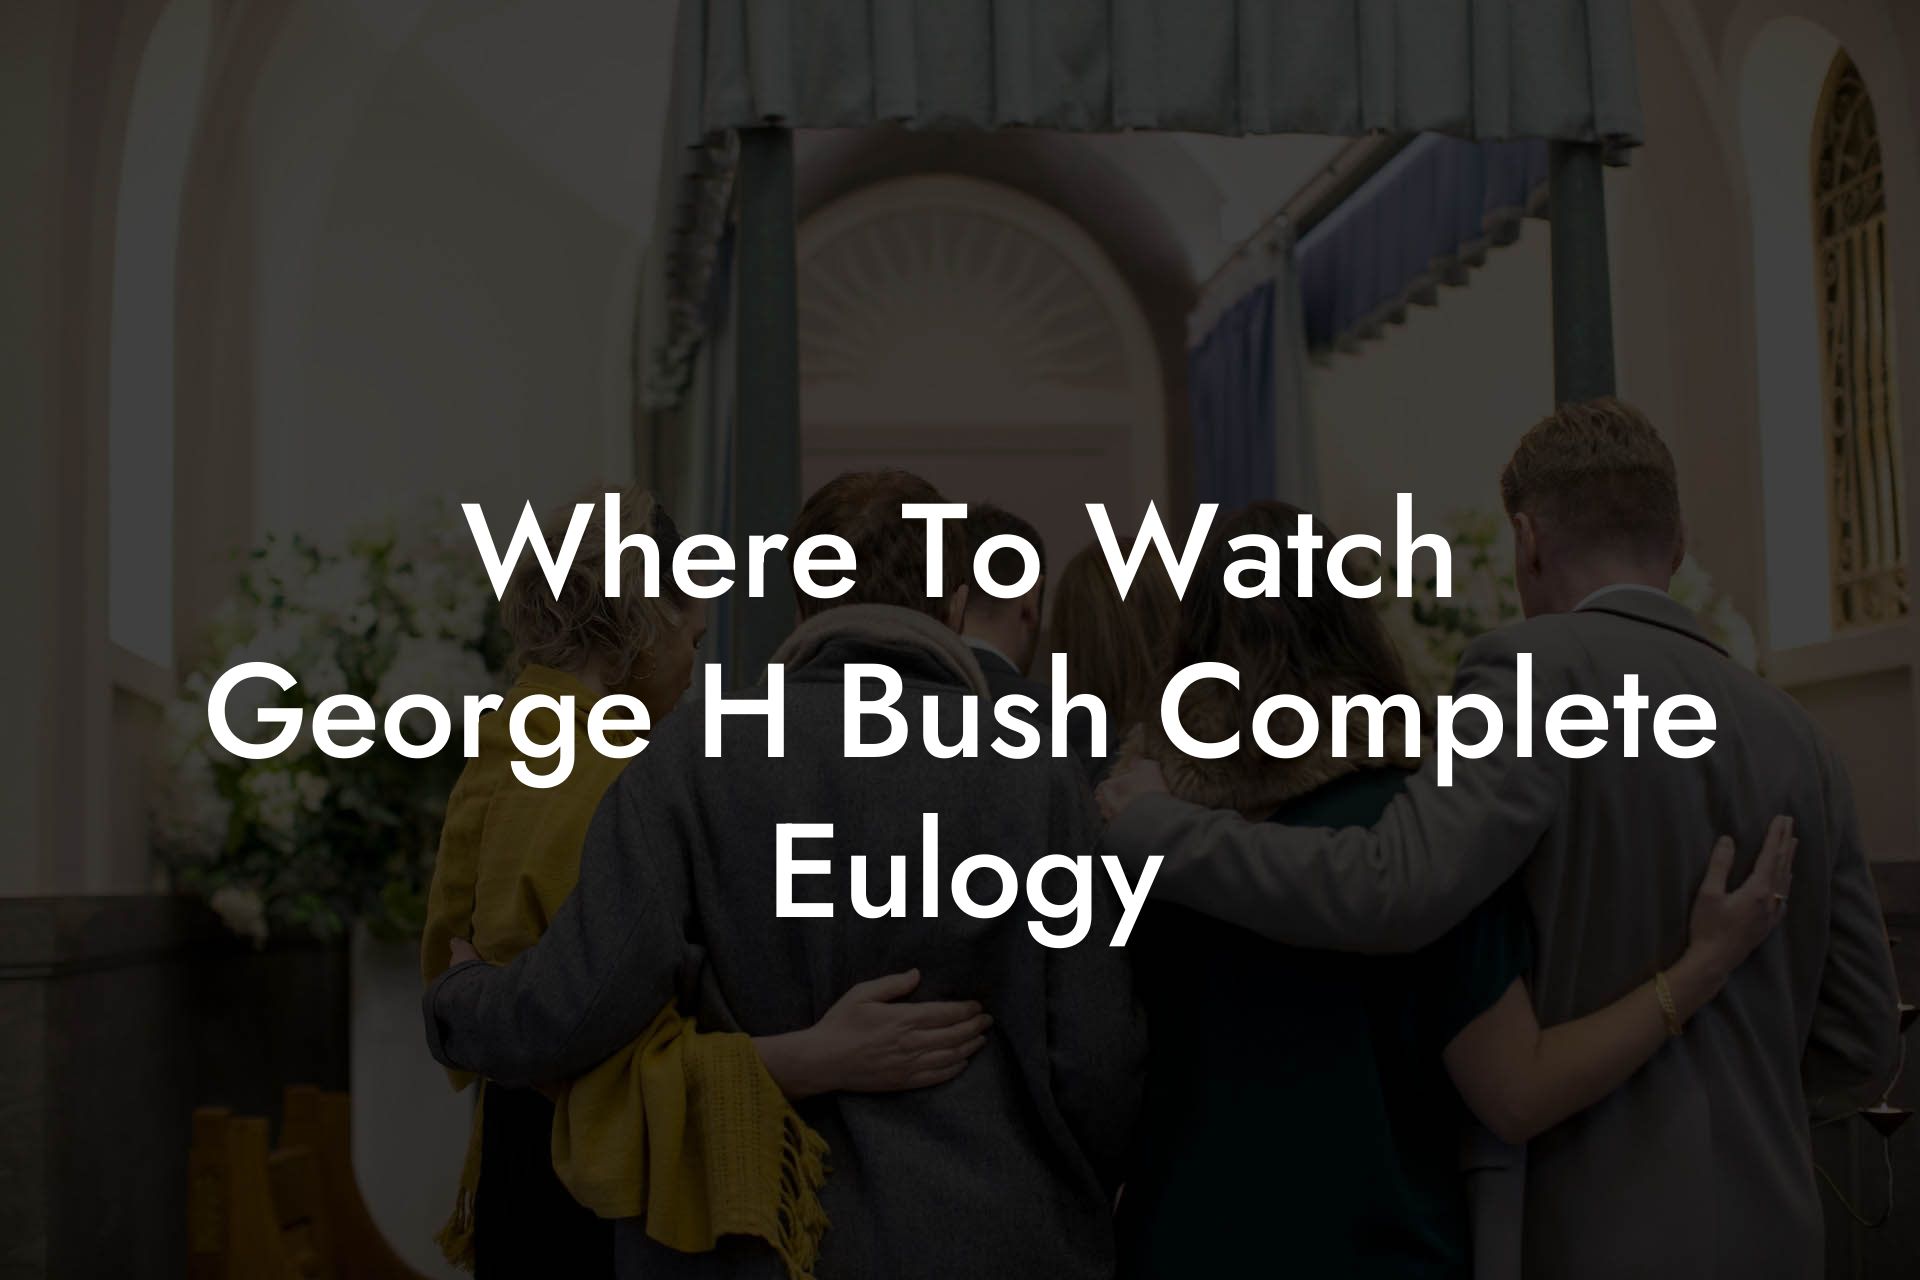 Where To Watch George H Bush Complete Eulogy